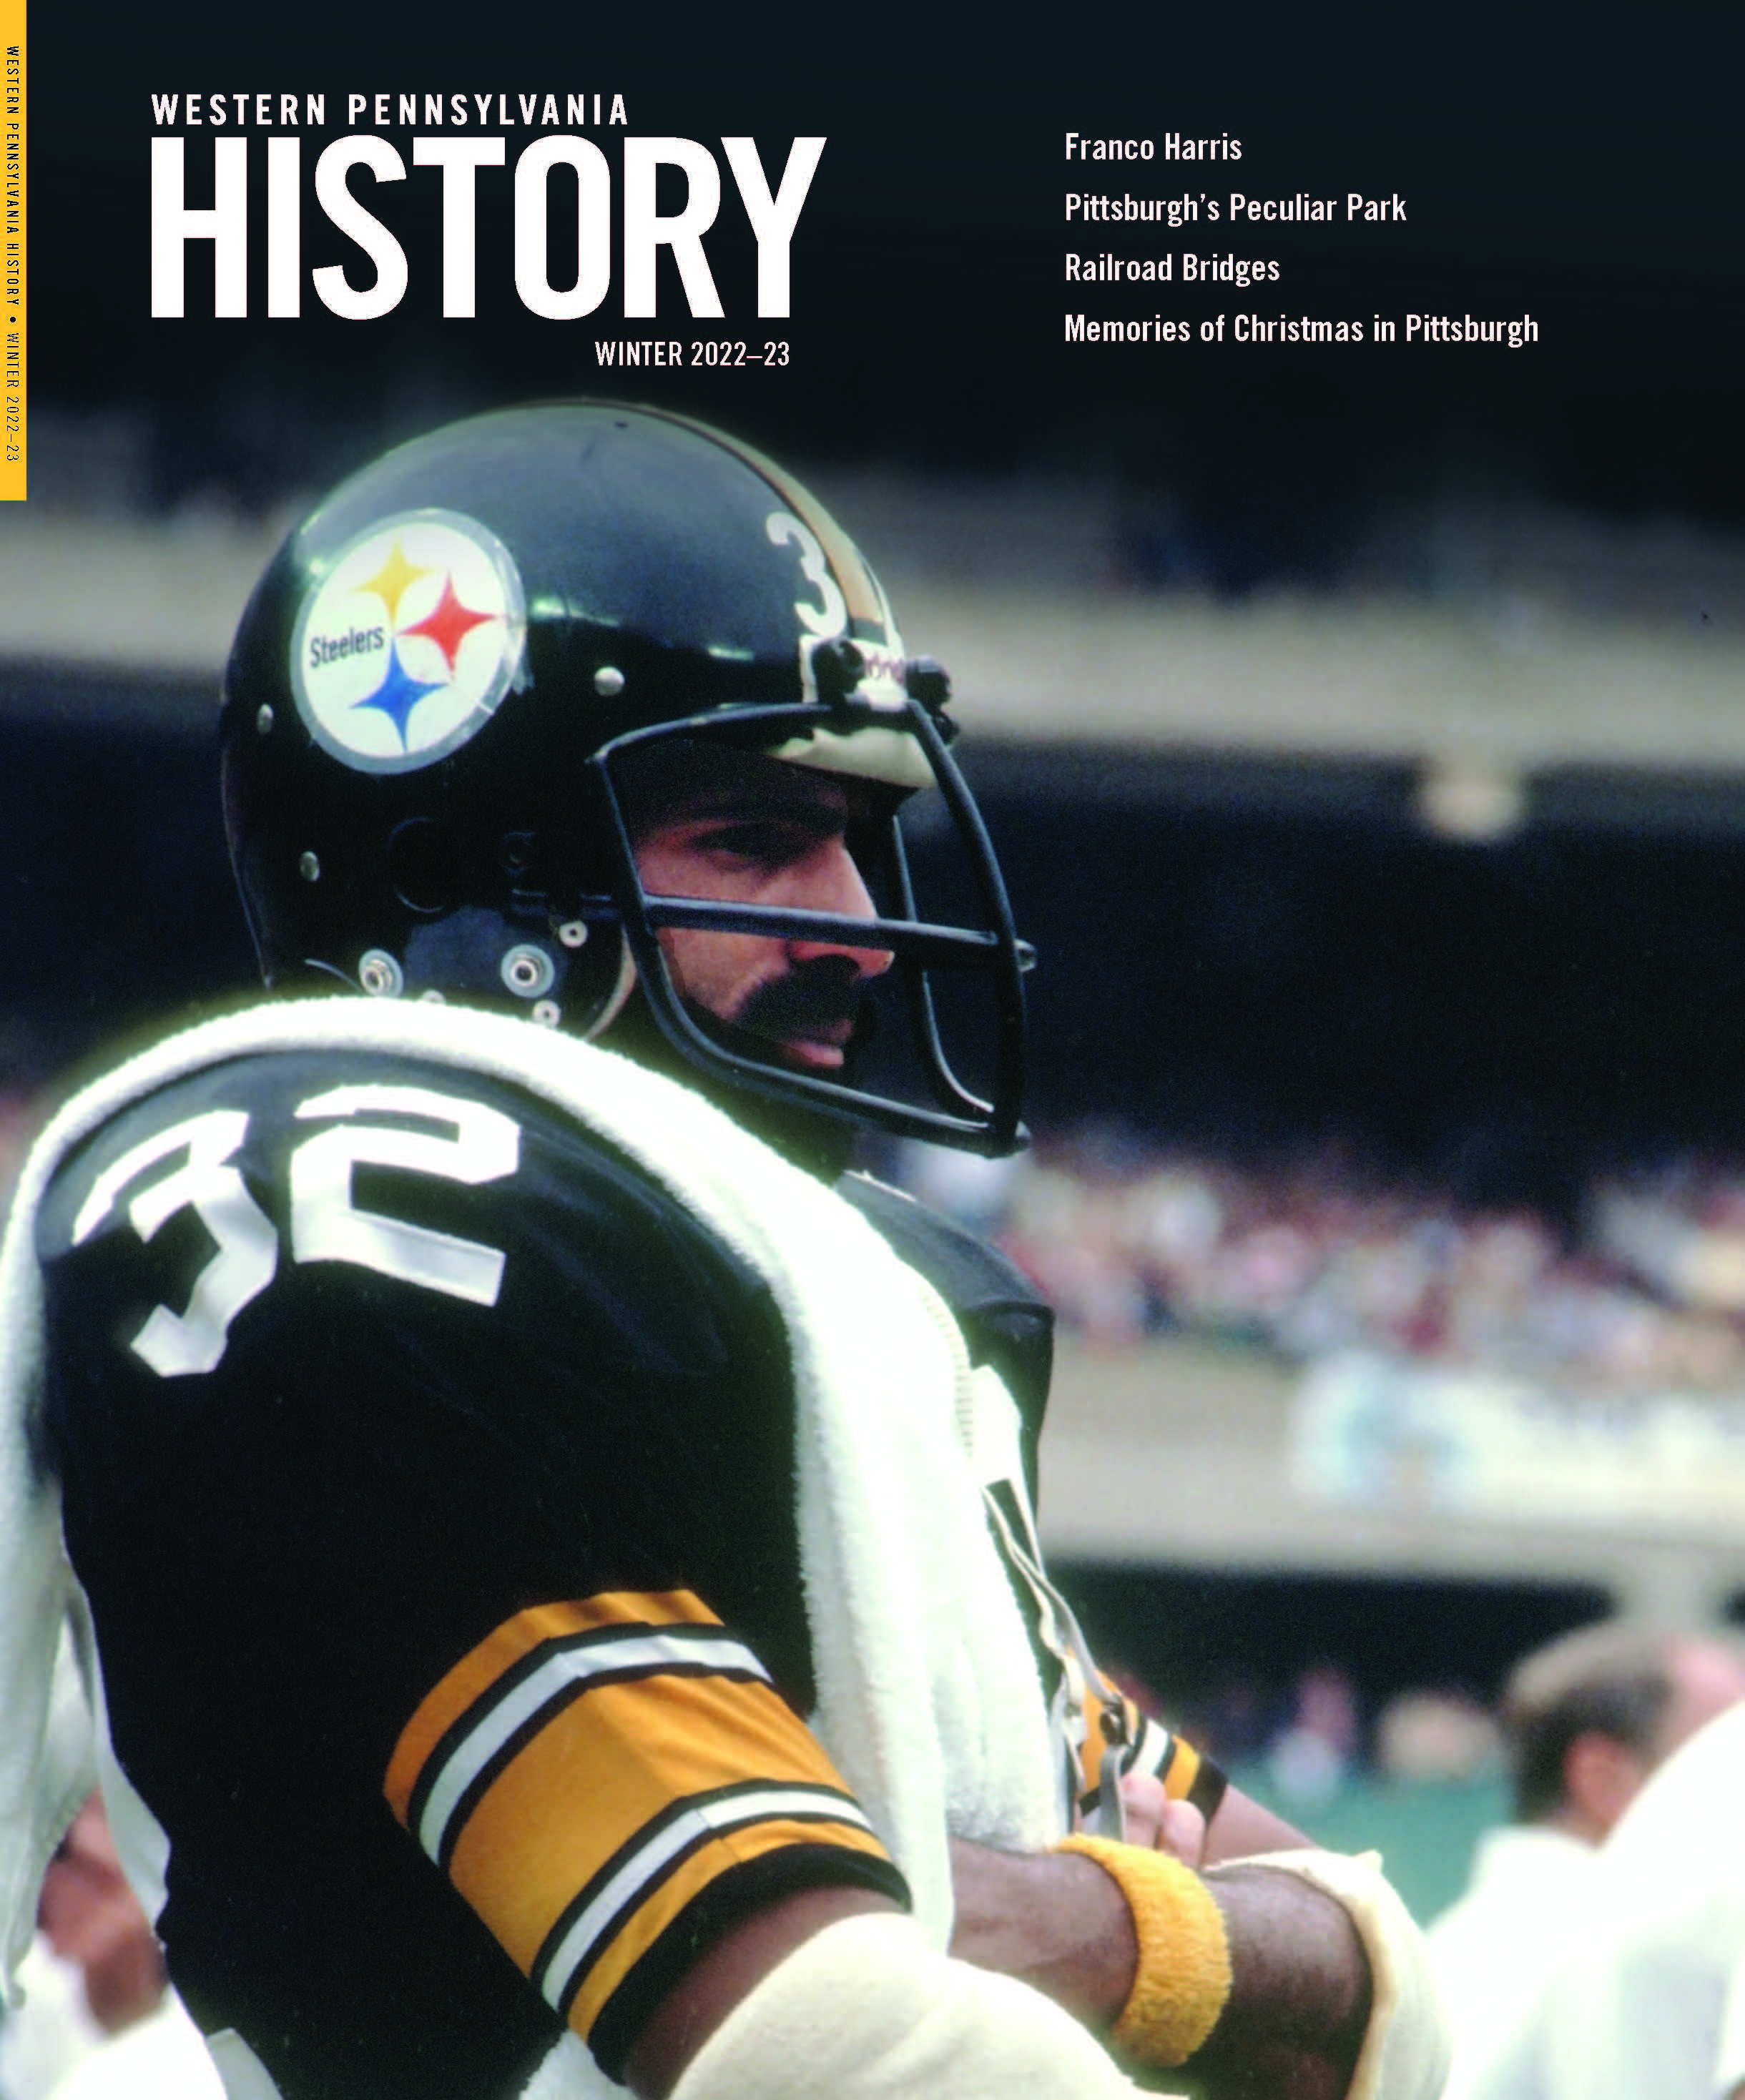 Magazine cover with photo of Franco Harris wearing a Steelers uniform in a stadium.